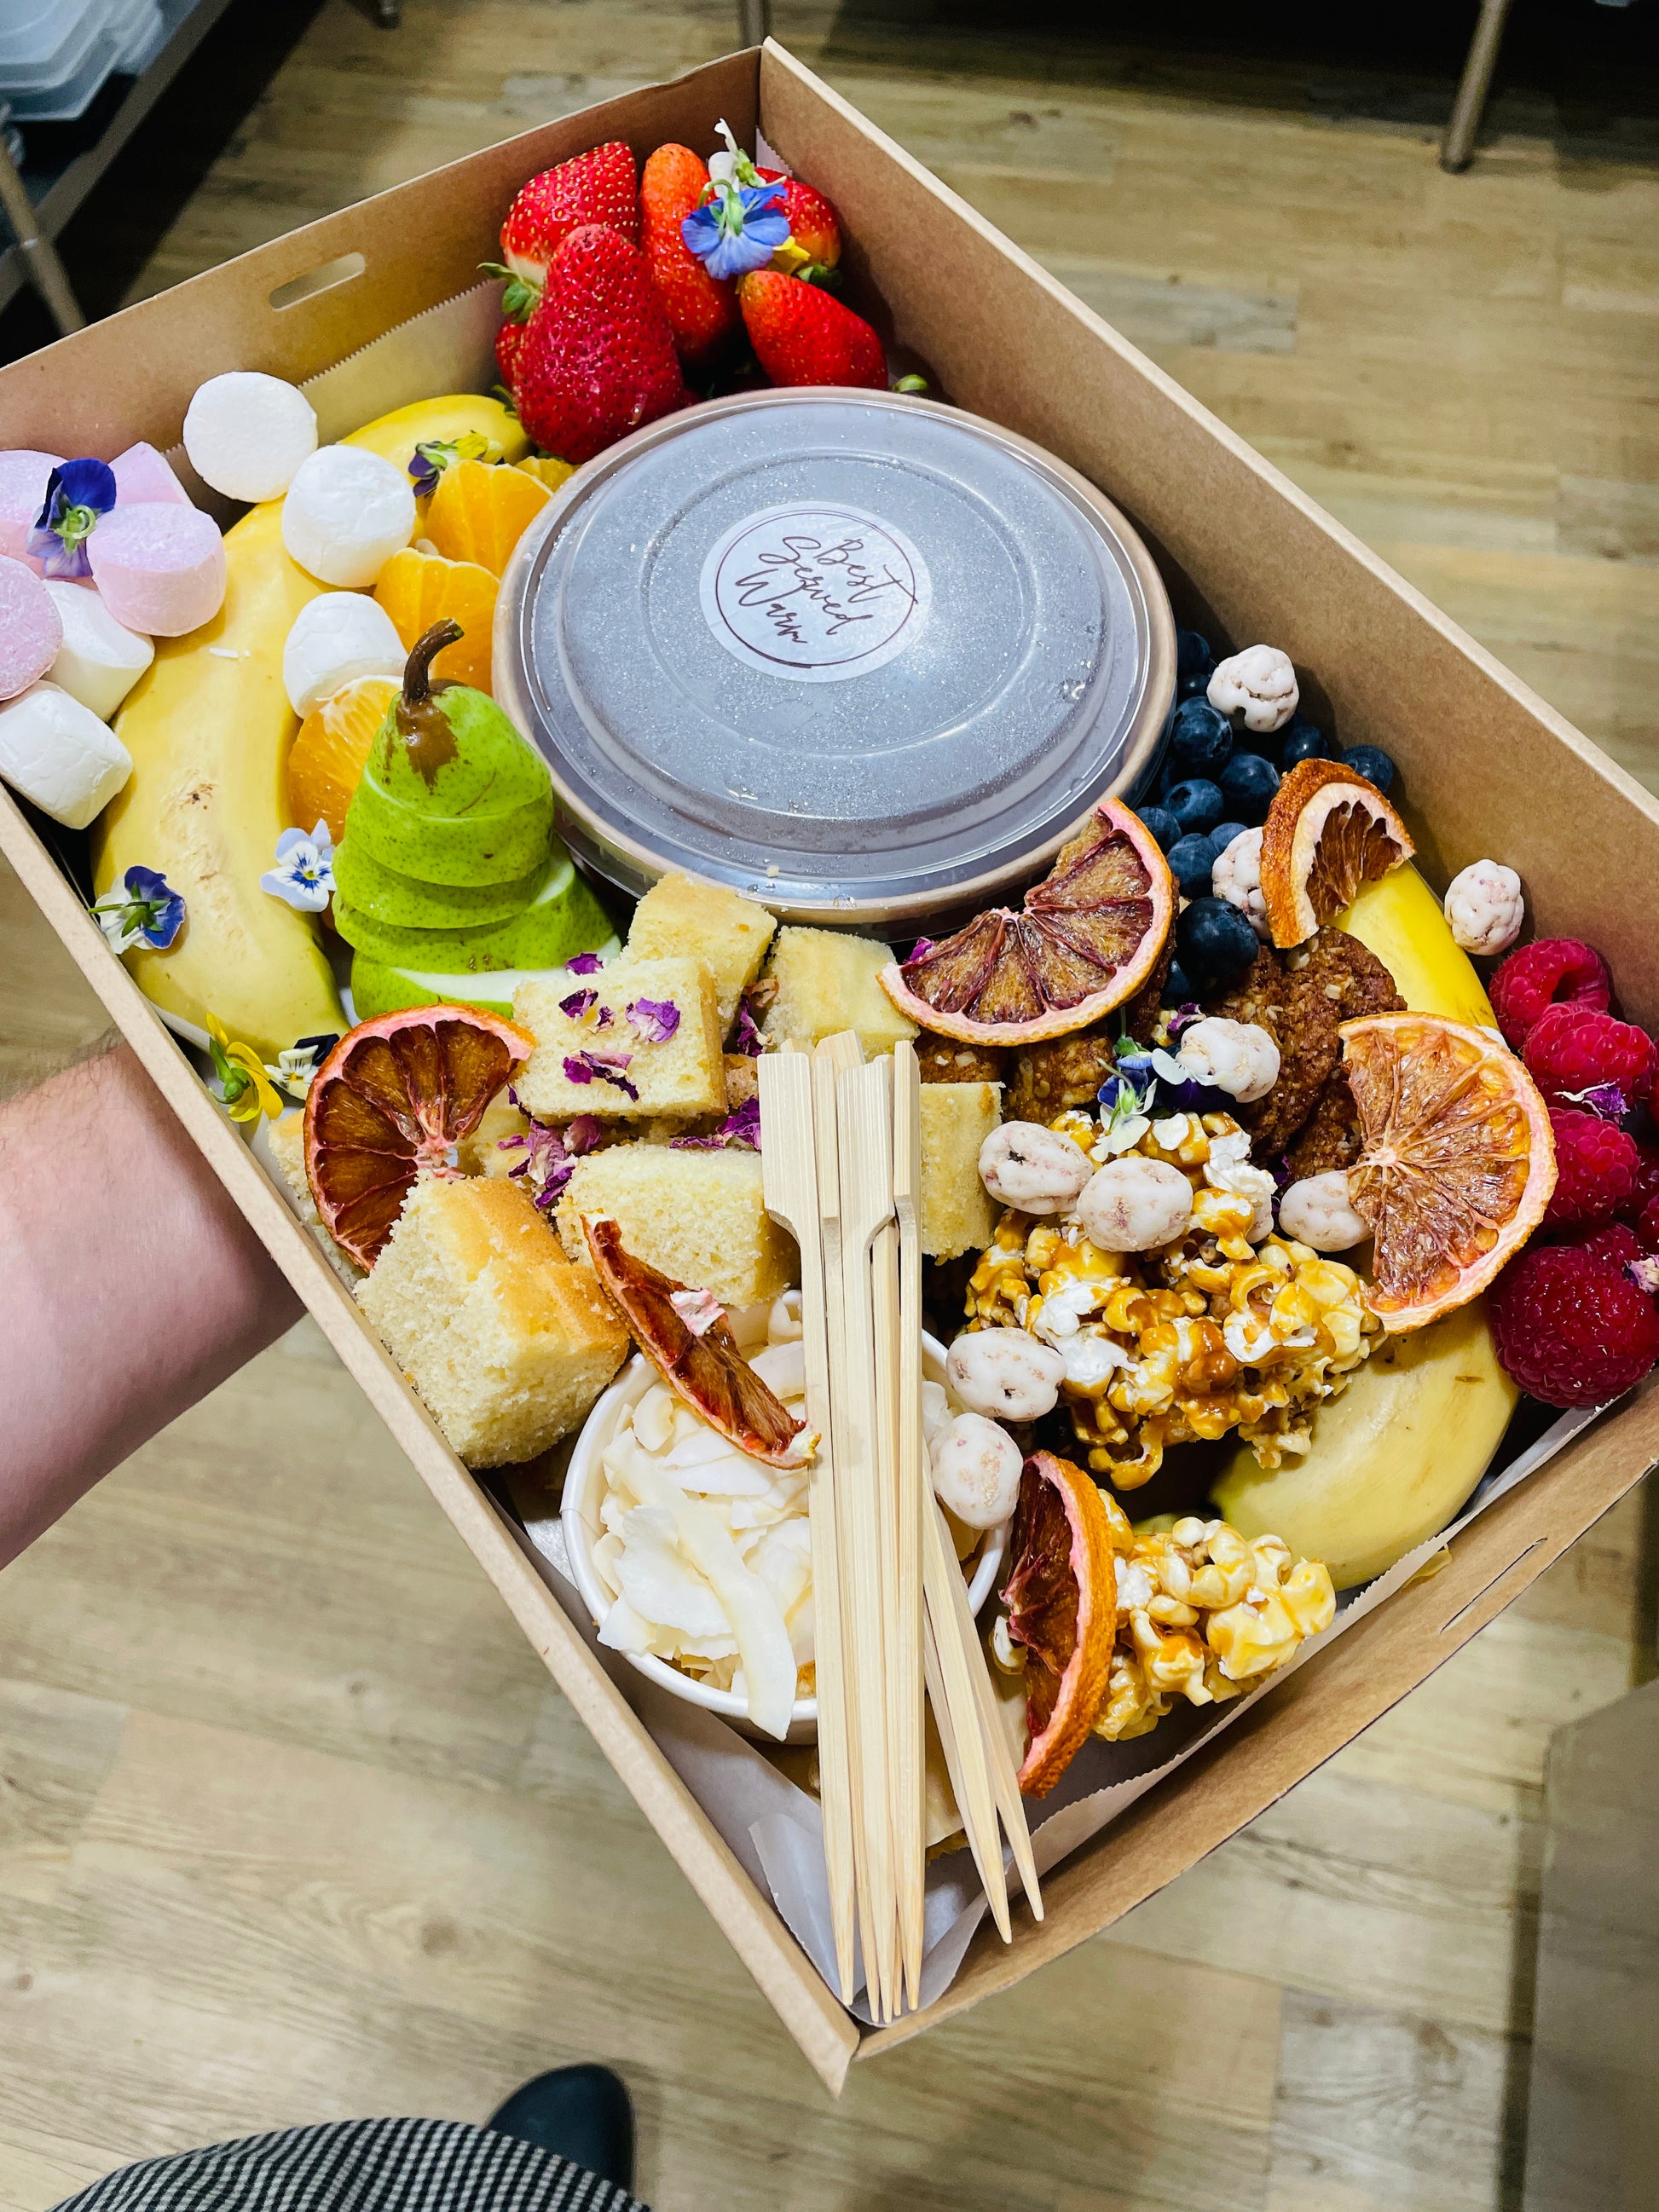 Melted dark chocolate fondue, fresh sponge, thick coconut flakes make your very own gourmet lamington. Tonnes of delicious in season fresh fruits plus caramel popcorn and marshmallows make this a perfect dessert grazing box